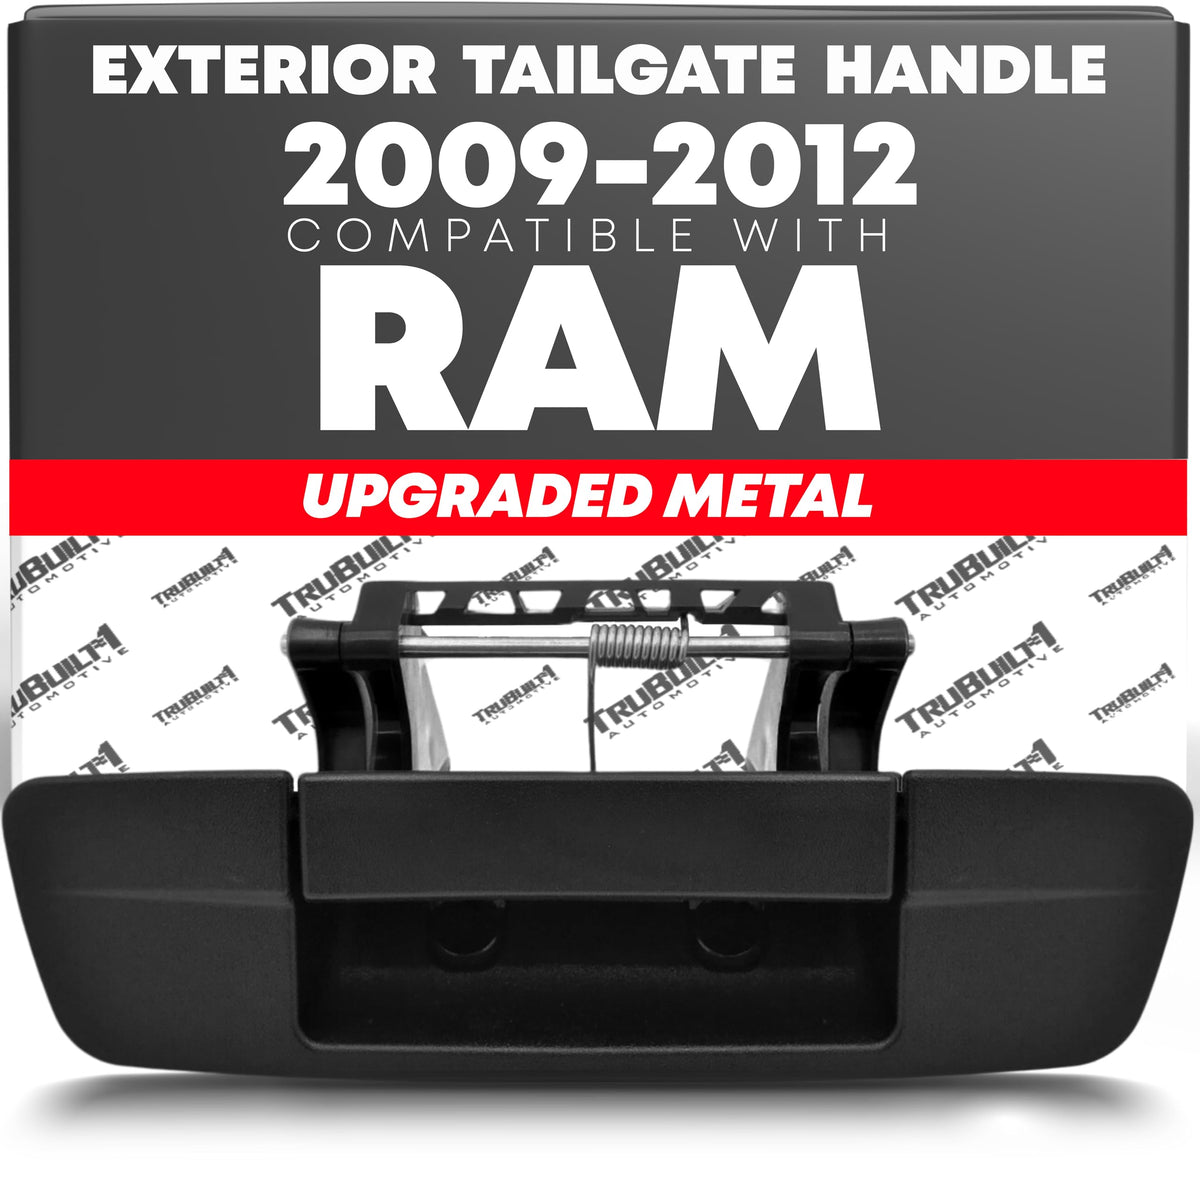 55397292AB, 83203, 15727 Upgraded Metal Exterior Tailgate Handle Compatible with 09-12 Dodge Ram 1500, 2010-2012 Ram 2500, 3500, CH1915123 | Textured Black | Without Keyhole & Back Up Camera